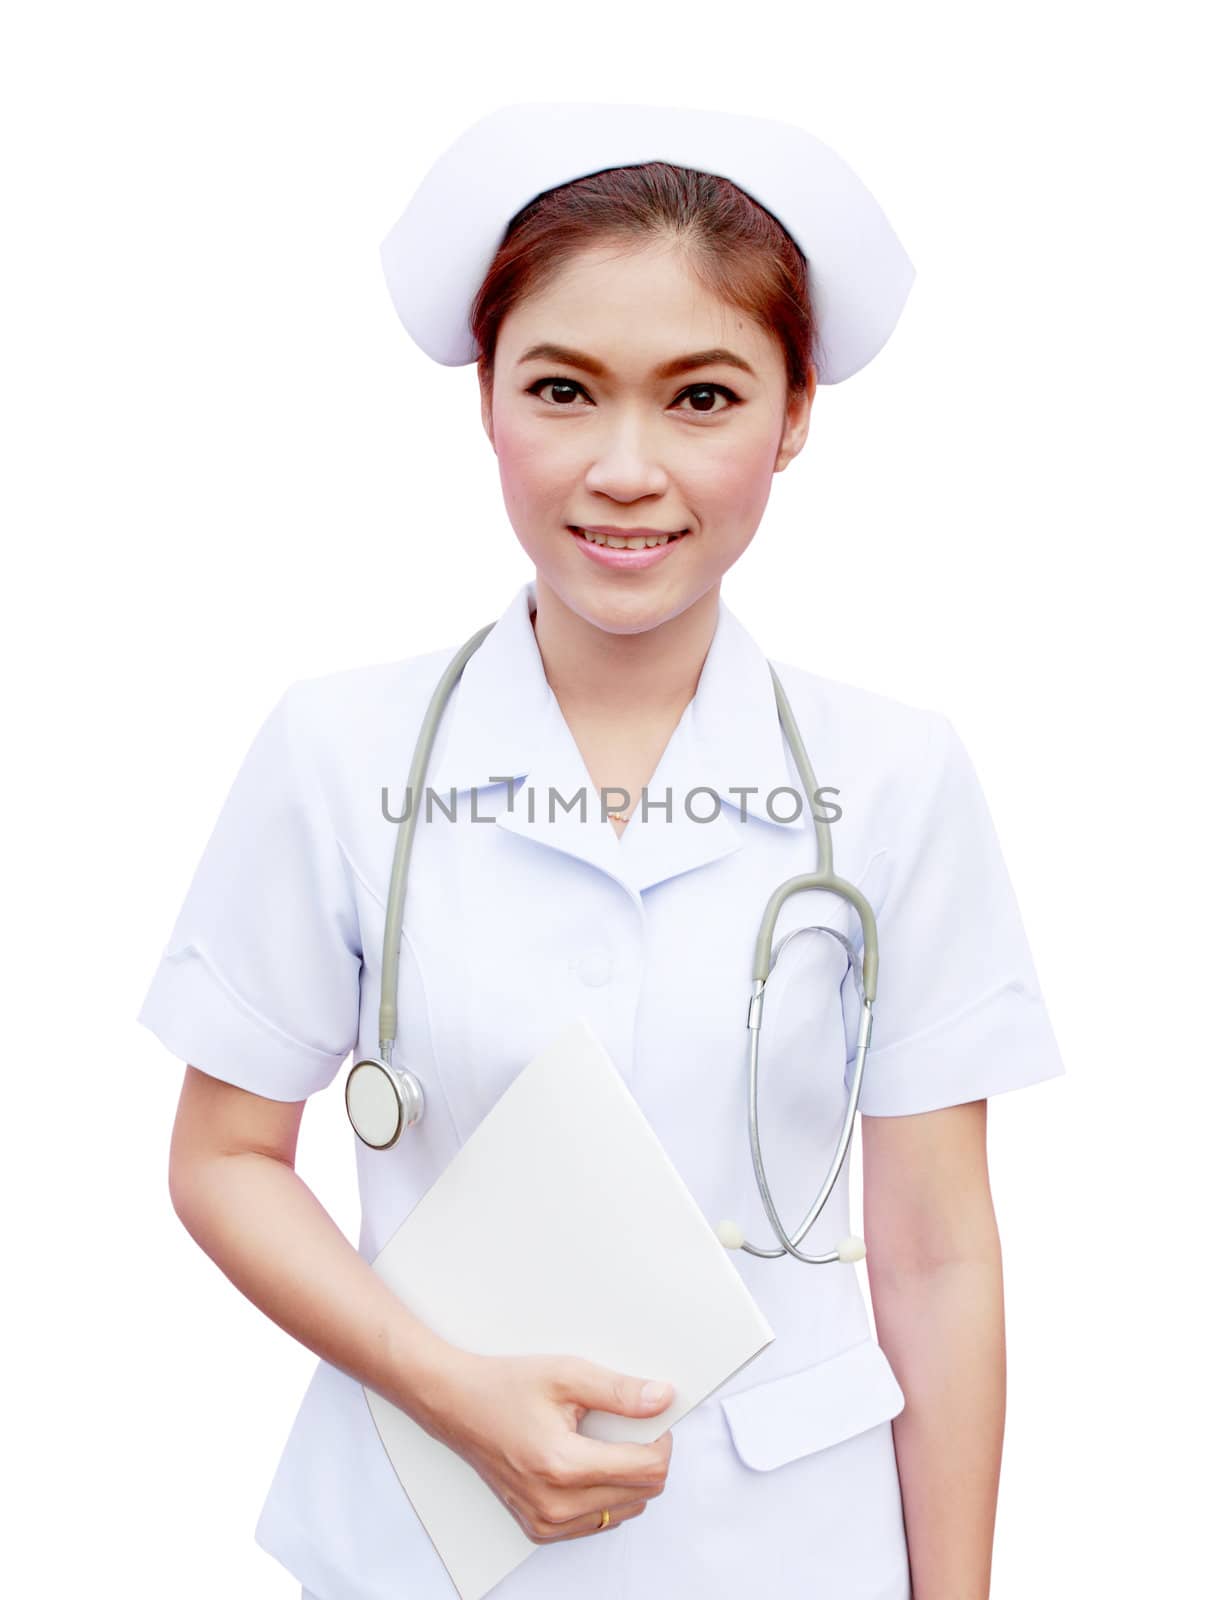 young nurse holding medical report and stethoscope on white background